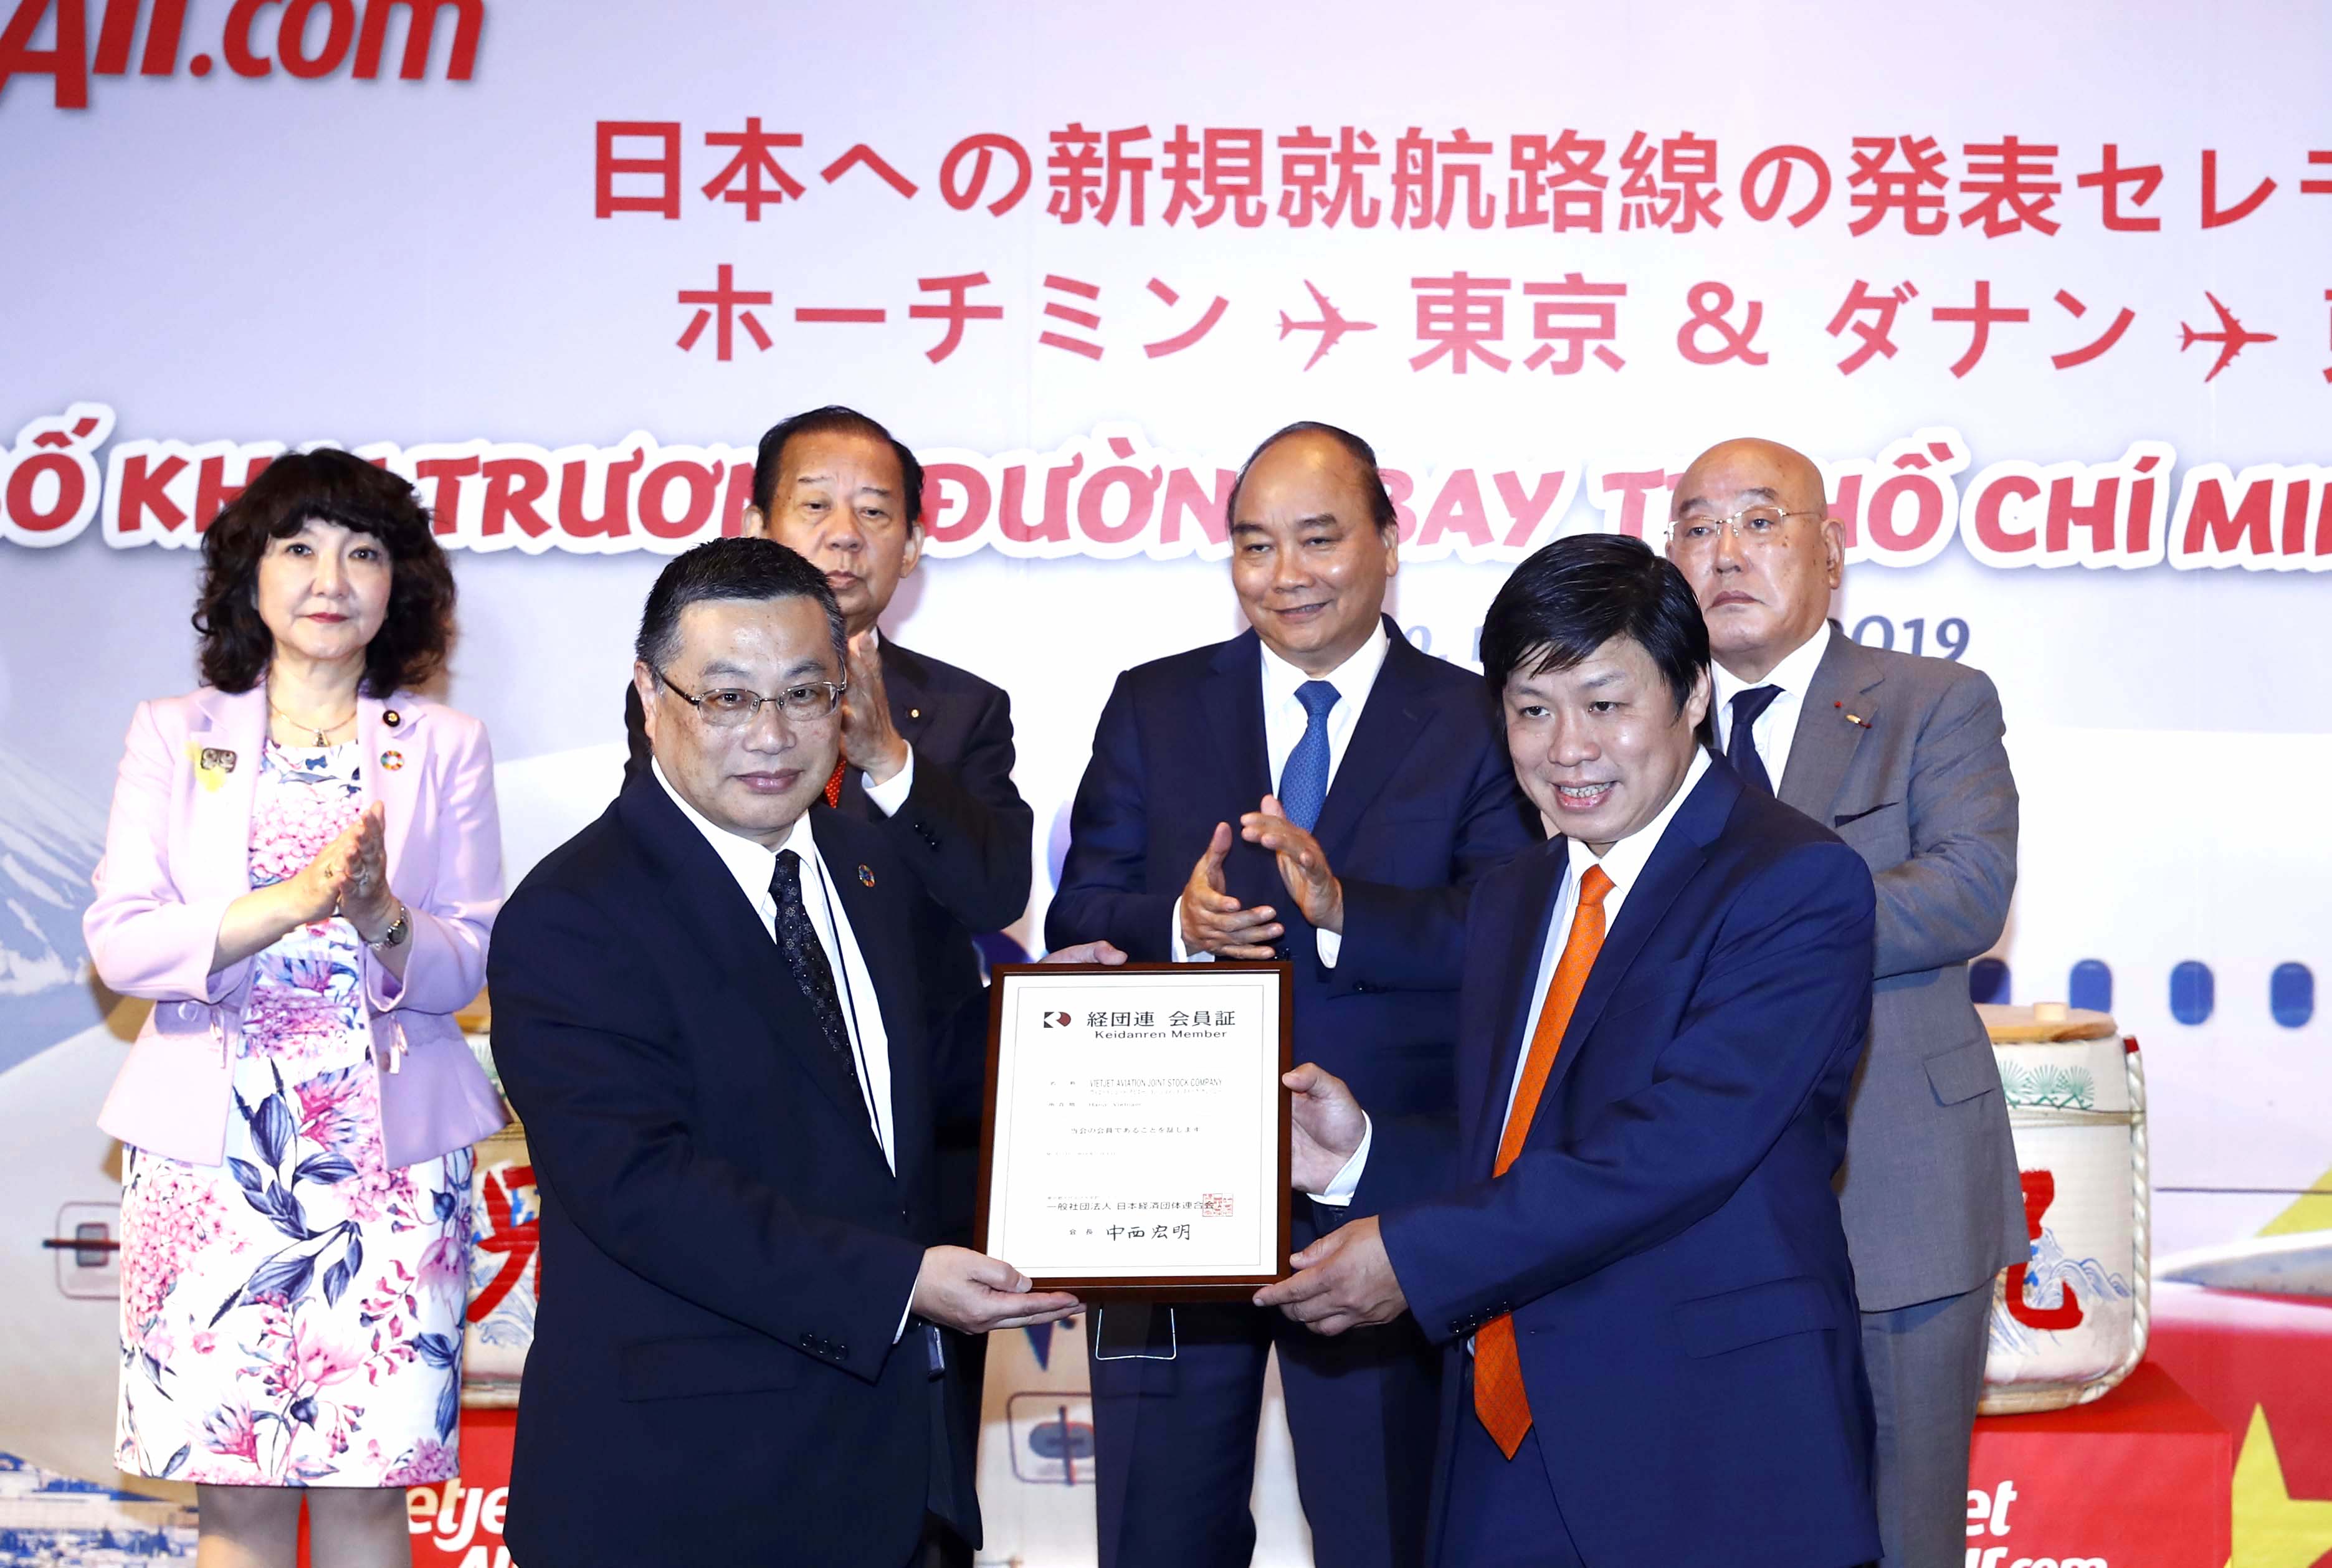 Vietjet launches new Japan services as carrier admitted to Japan Business Federation